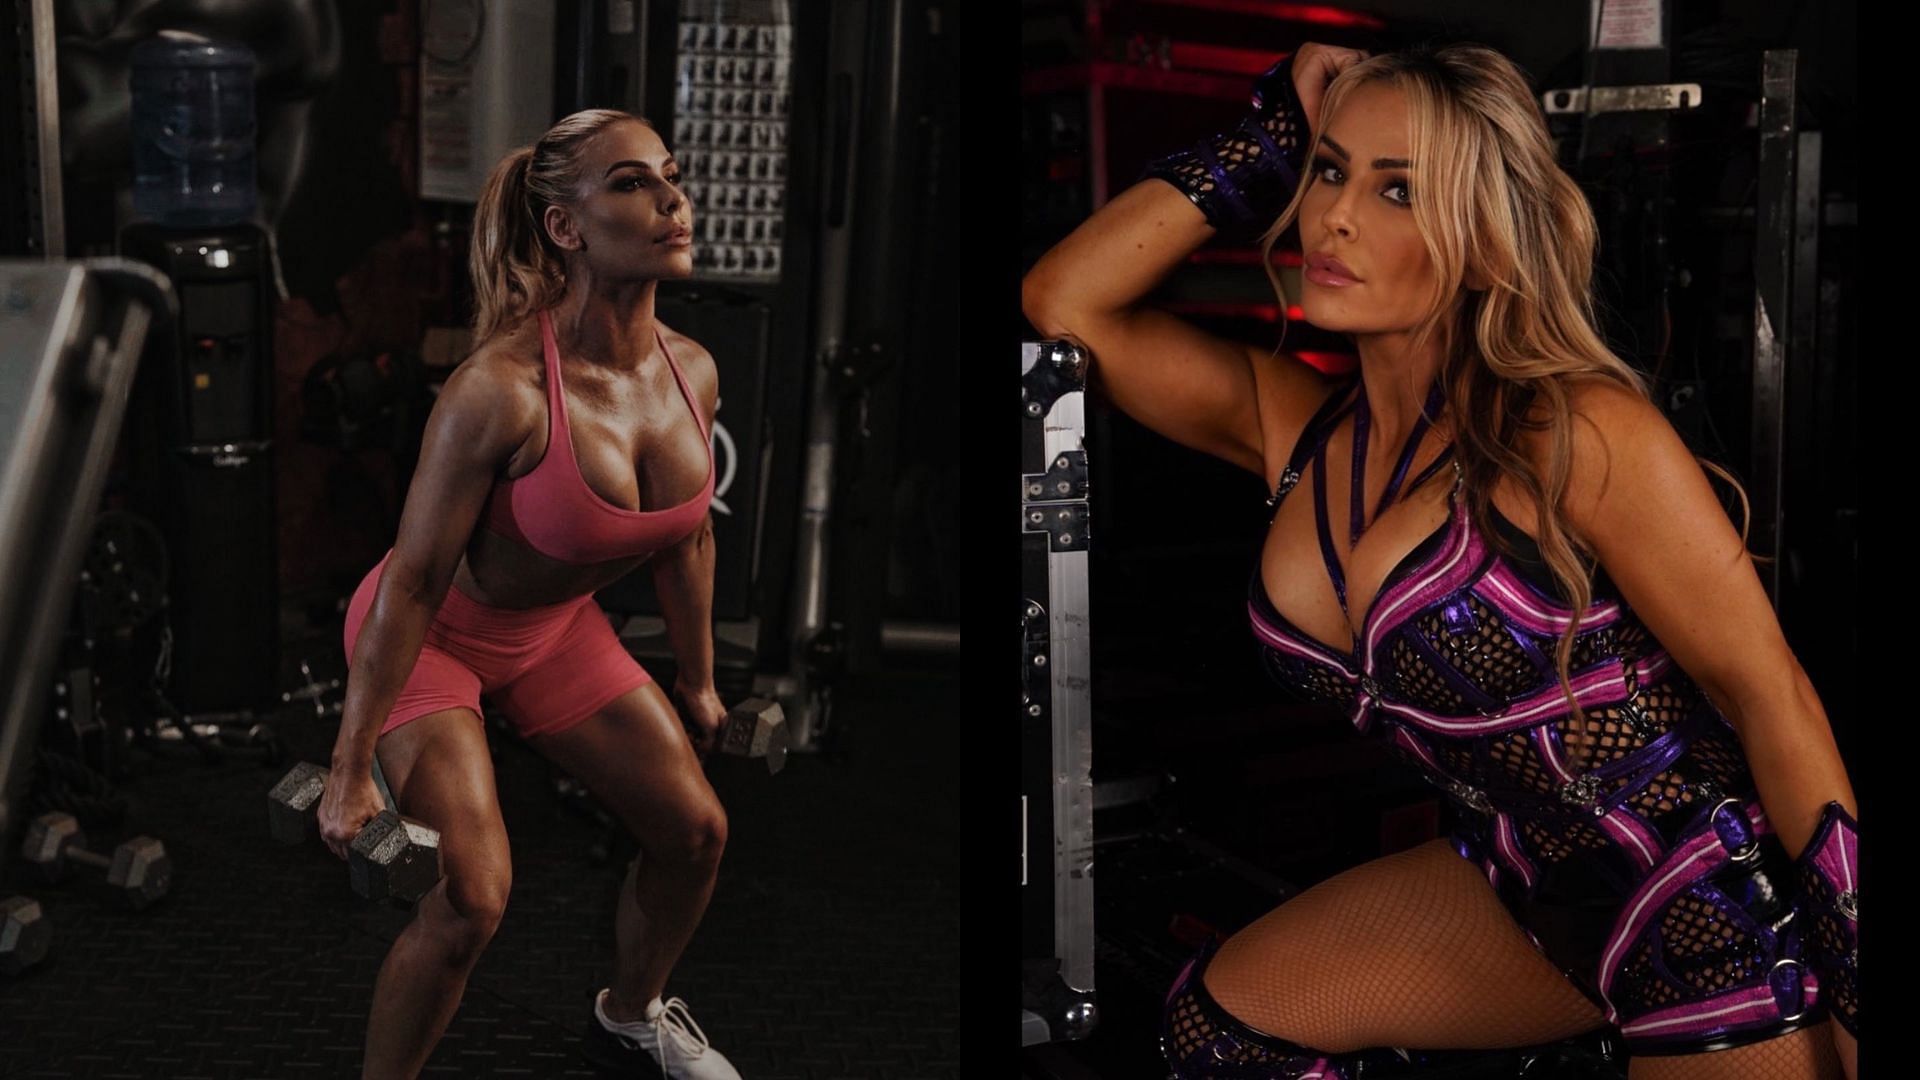 Natalya is one of the most experienced superstars in WWE